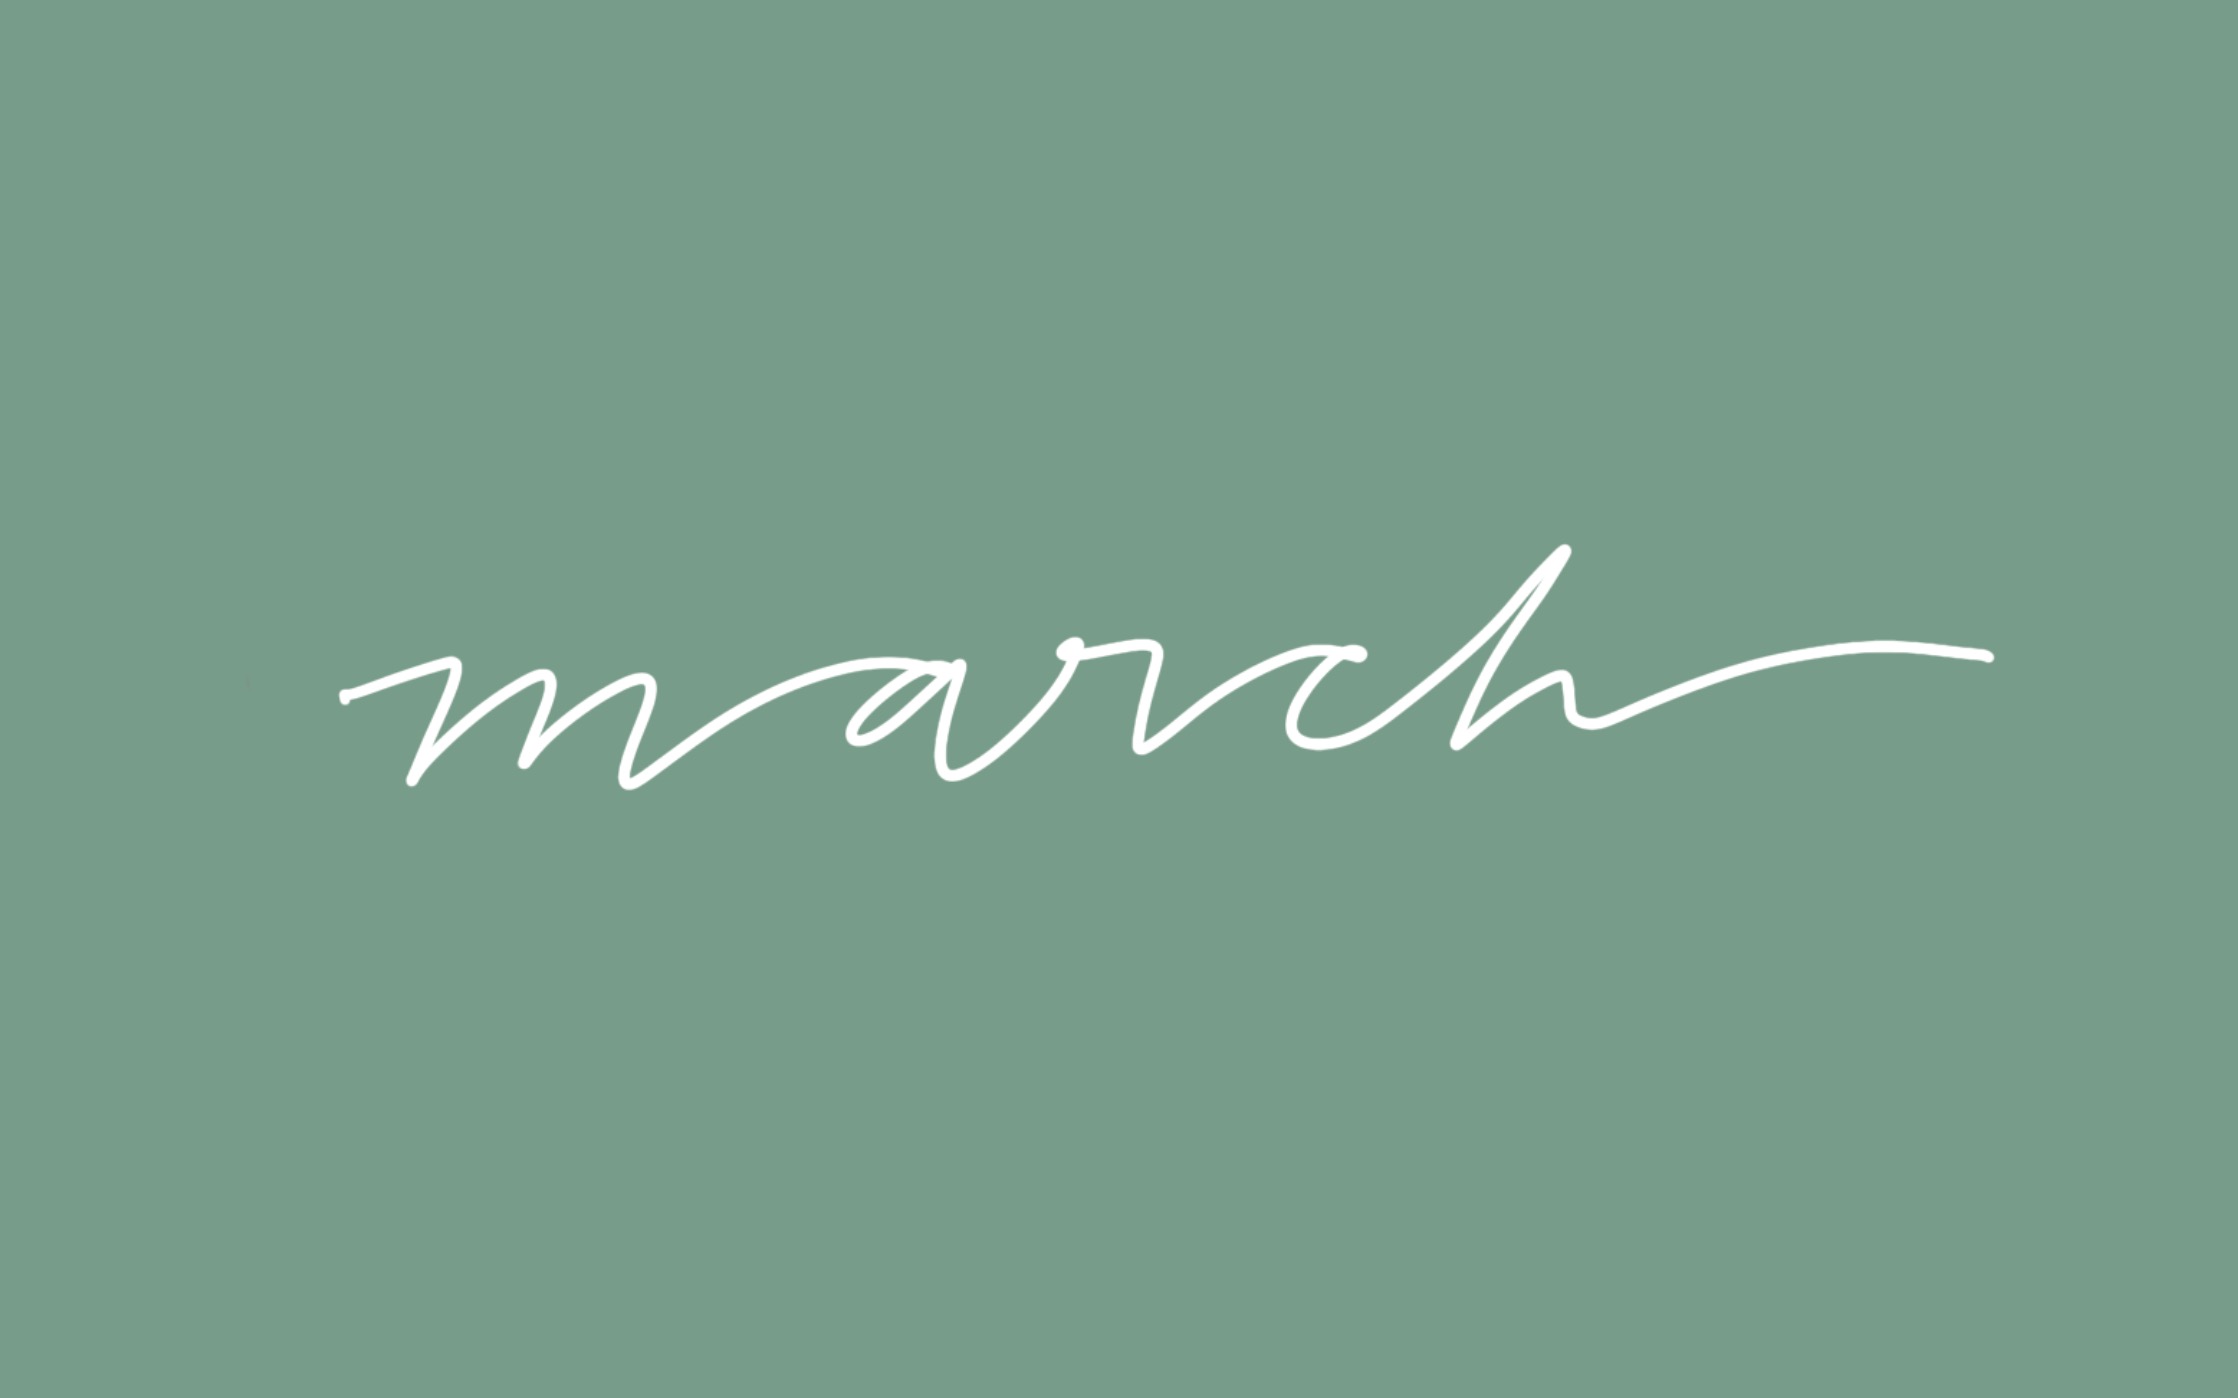 Free march digital backgrounds wallpapers for desktop mobile and tablet